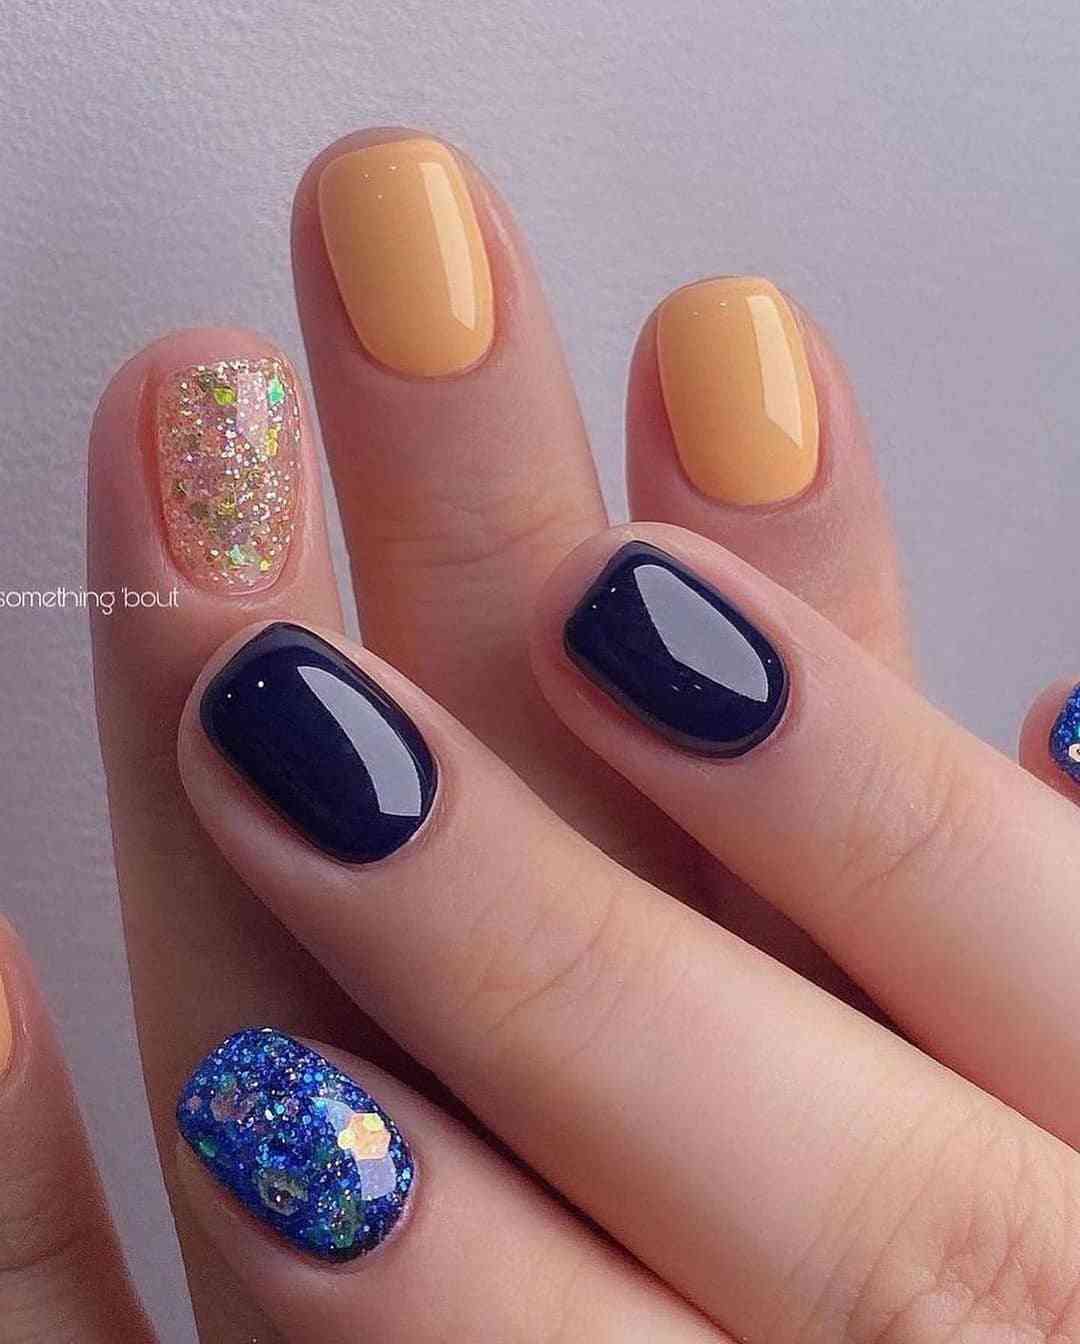 The 100+ Best Nail Designs Trends And Ideas In 2021 images 68